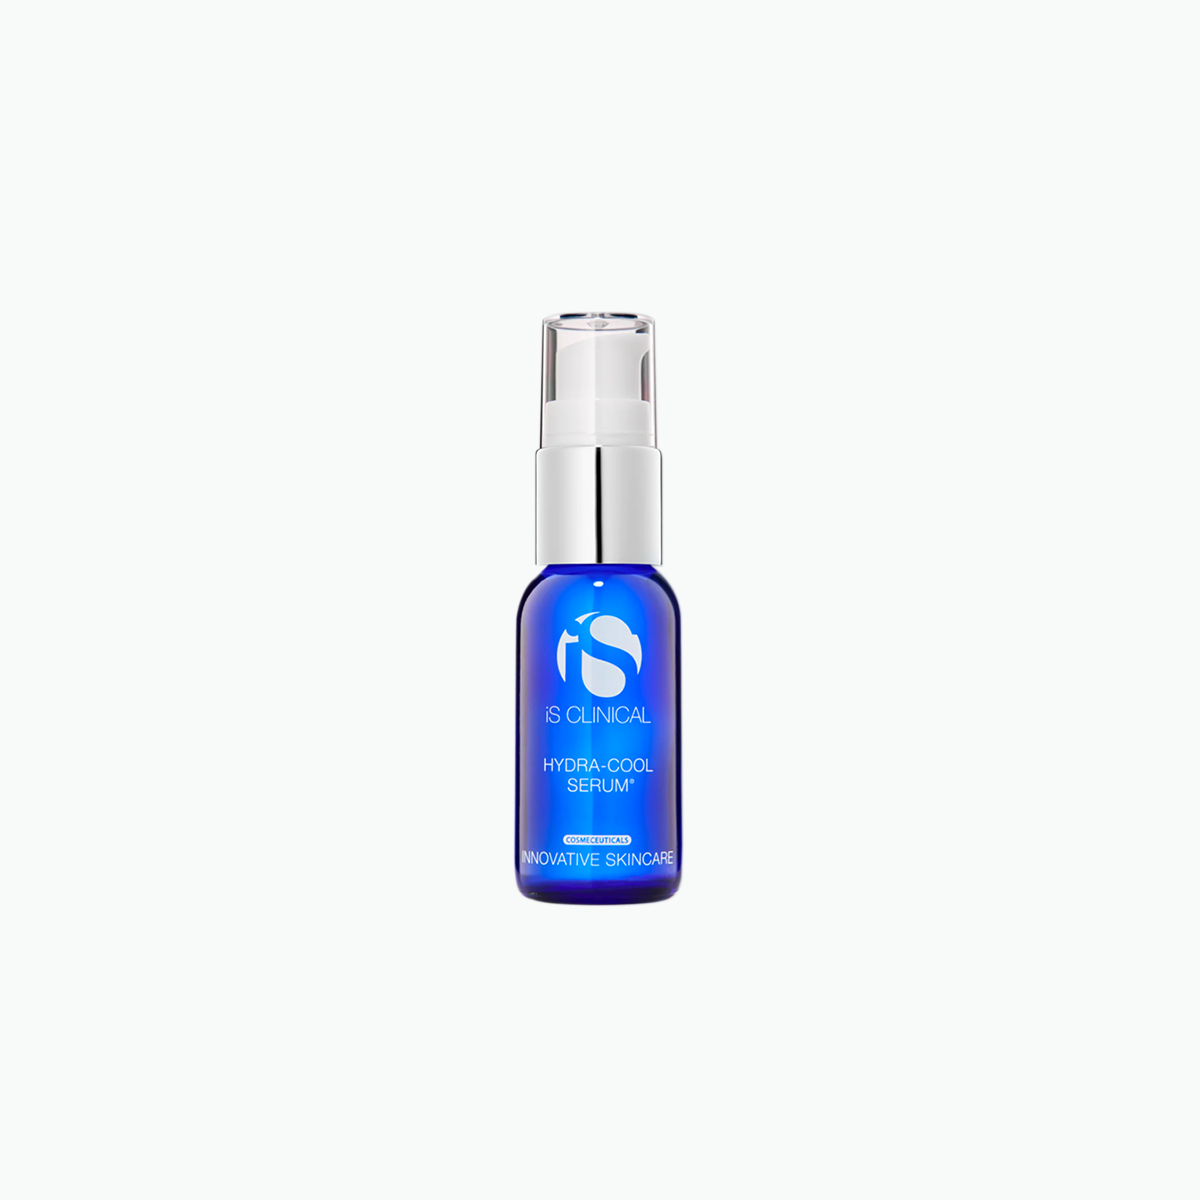 iS Clinical Hydra-Cool Serum for Hydrating and Clearing Skin (15mL or 0.5 oz)